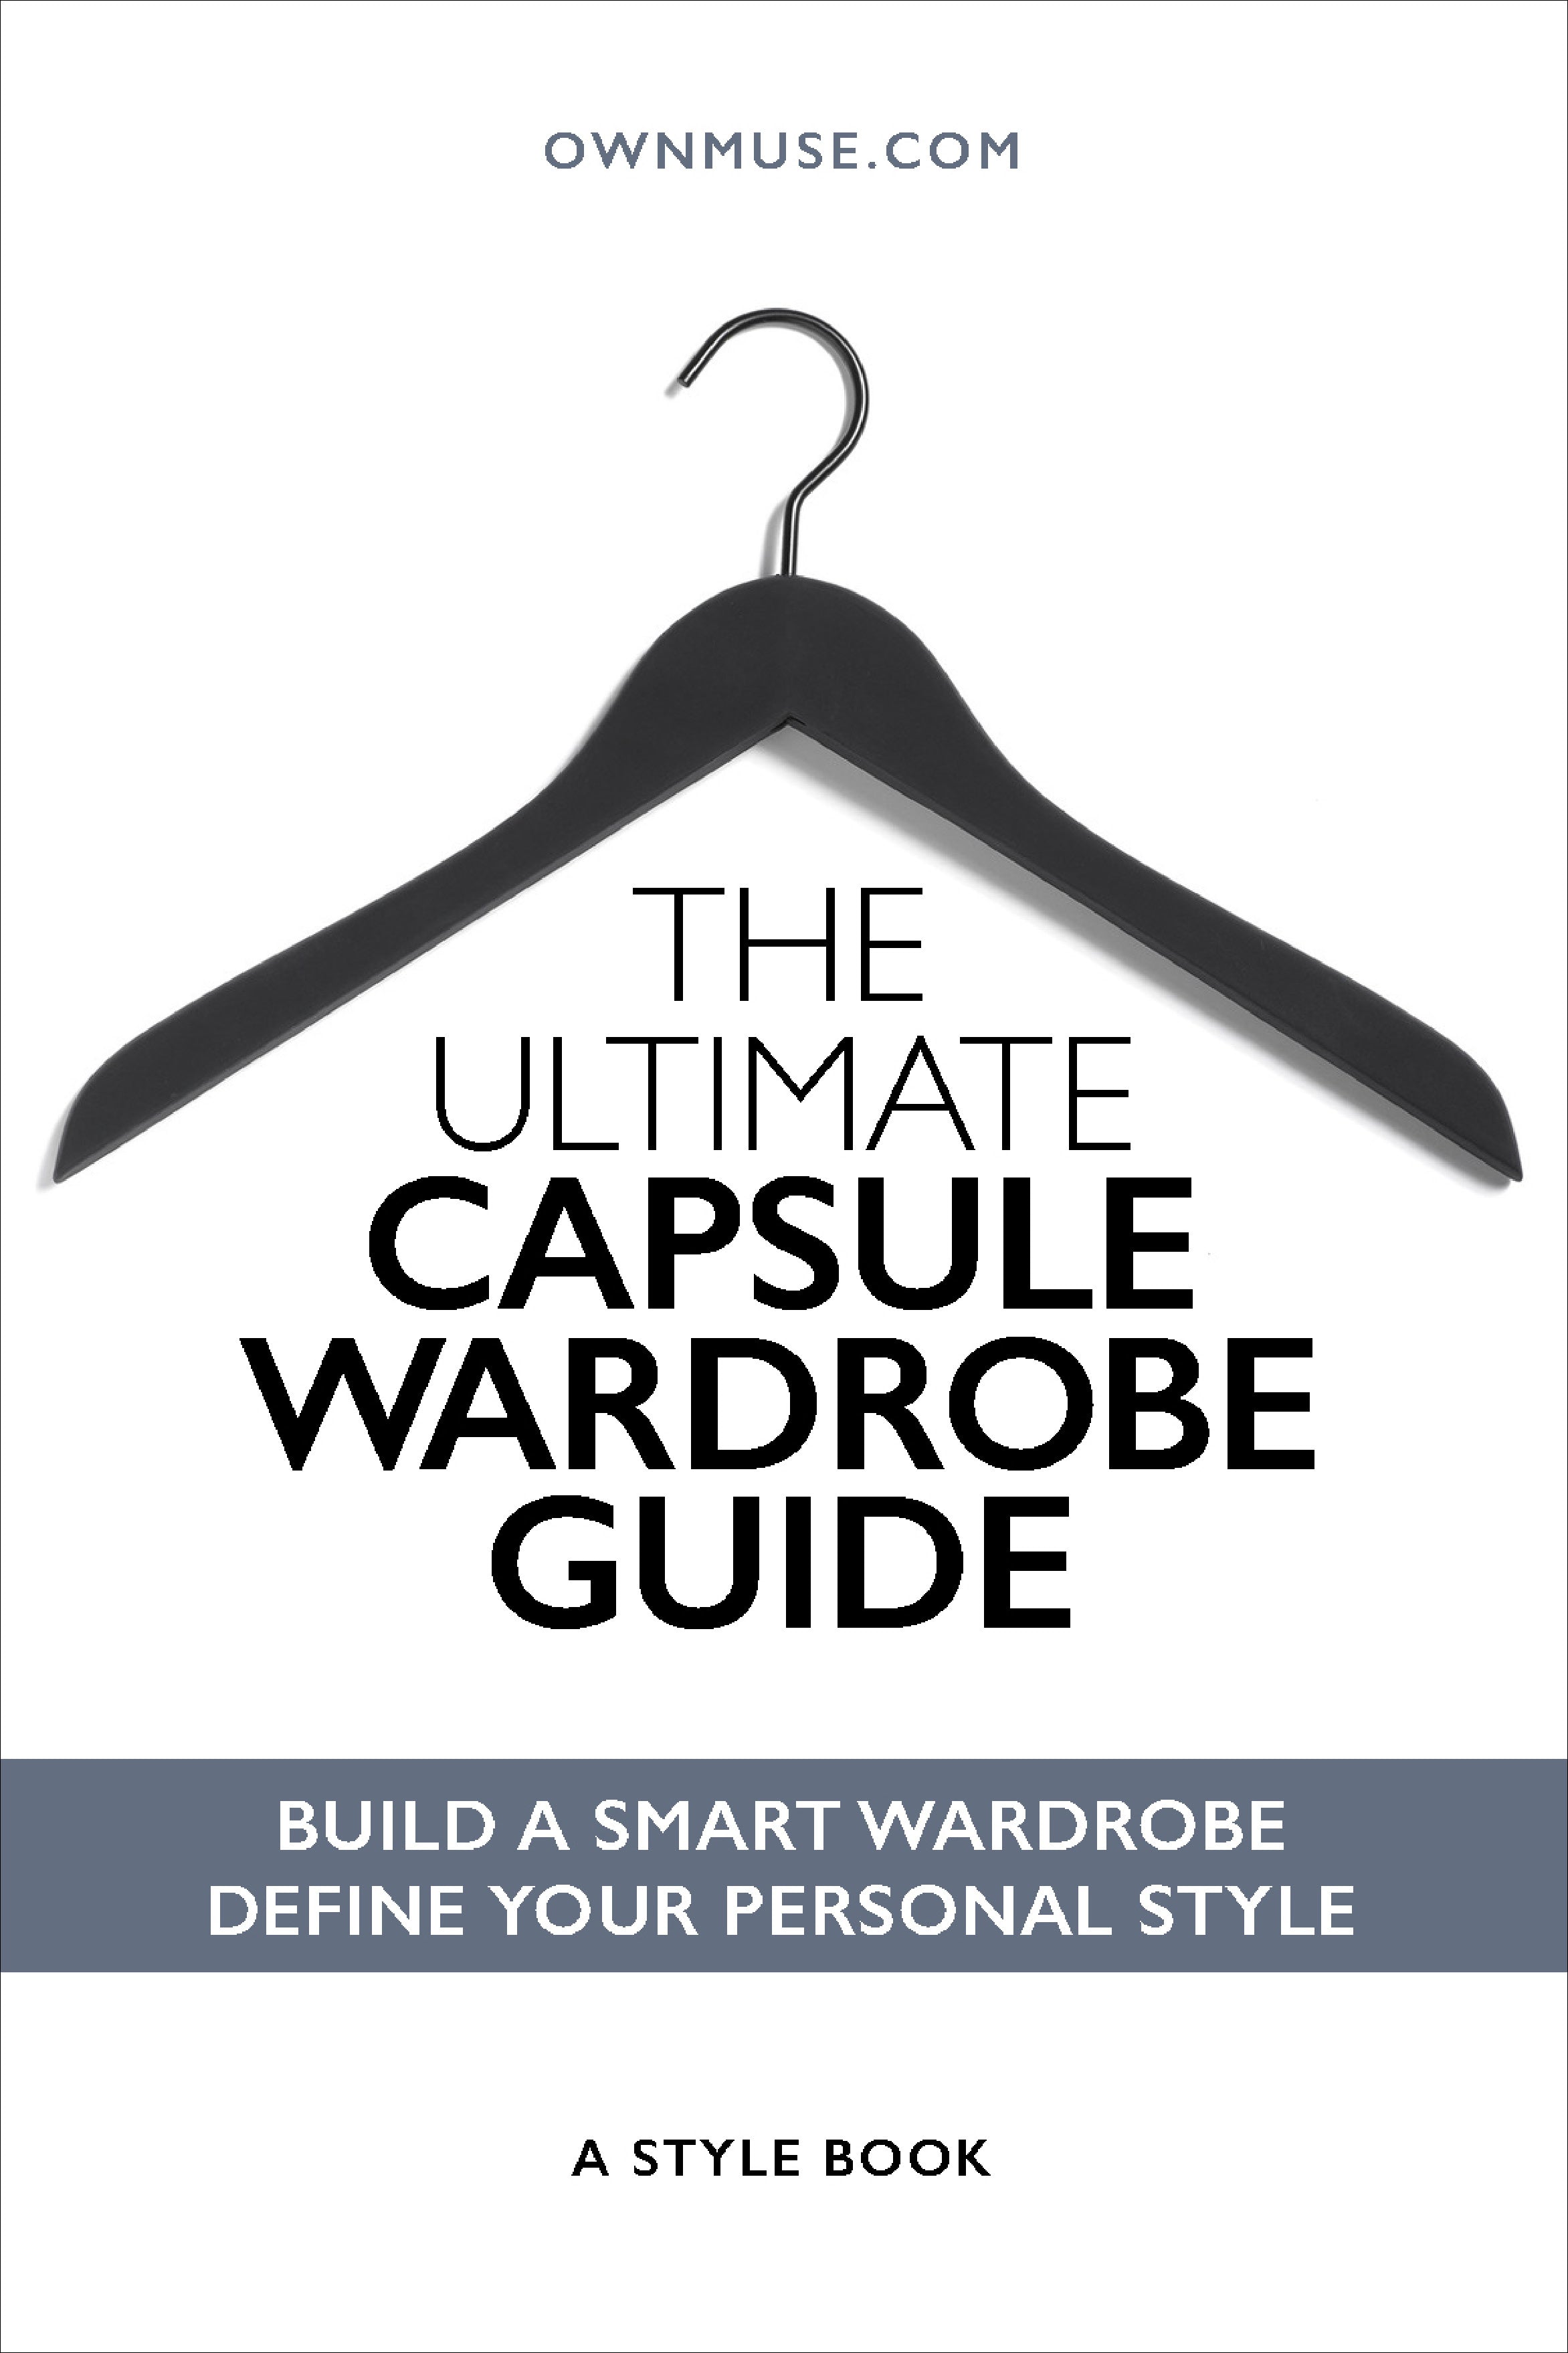 20 Items 20 Outfits - Capsule Wardrobe Style – OwnMuse